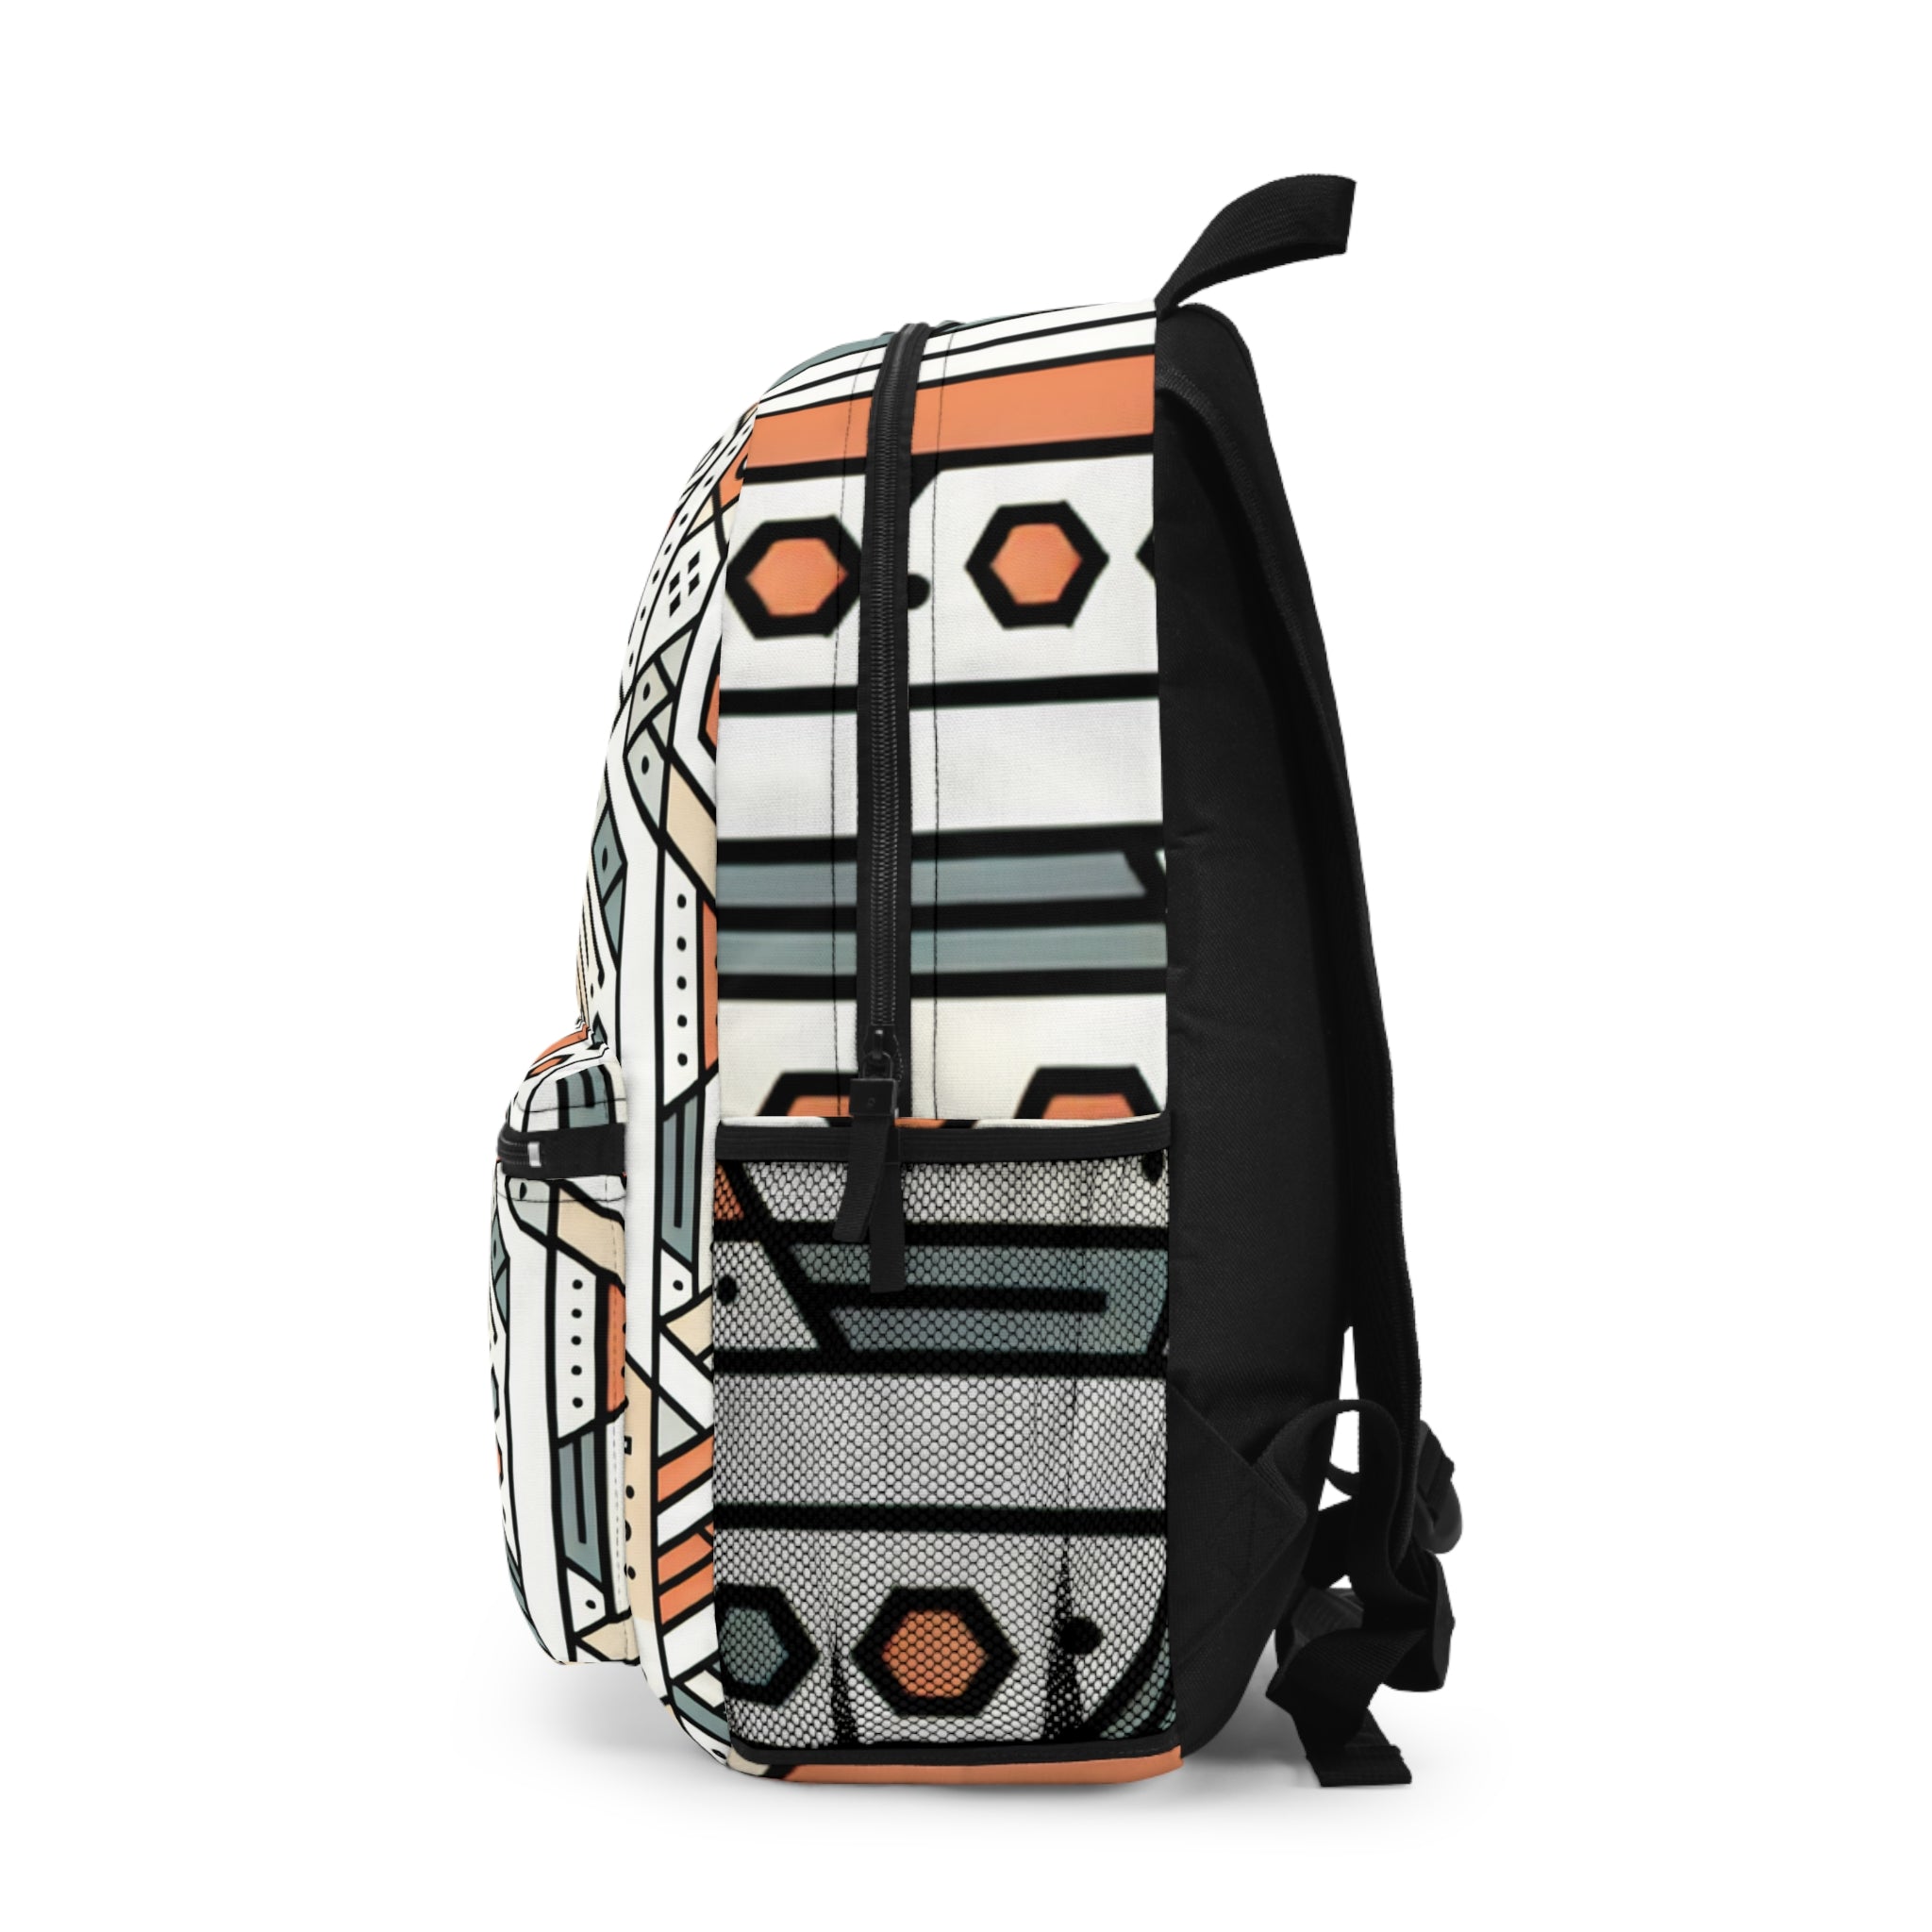 Theodore Backpack for Unisex Travelers - Backpack